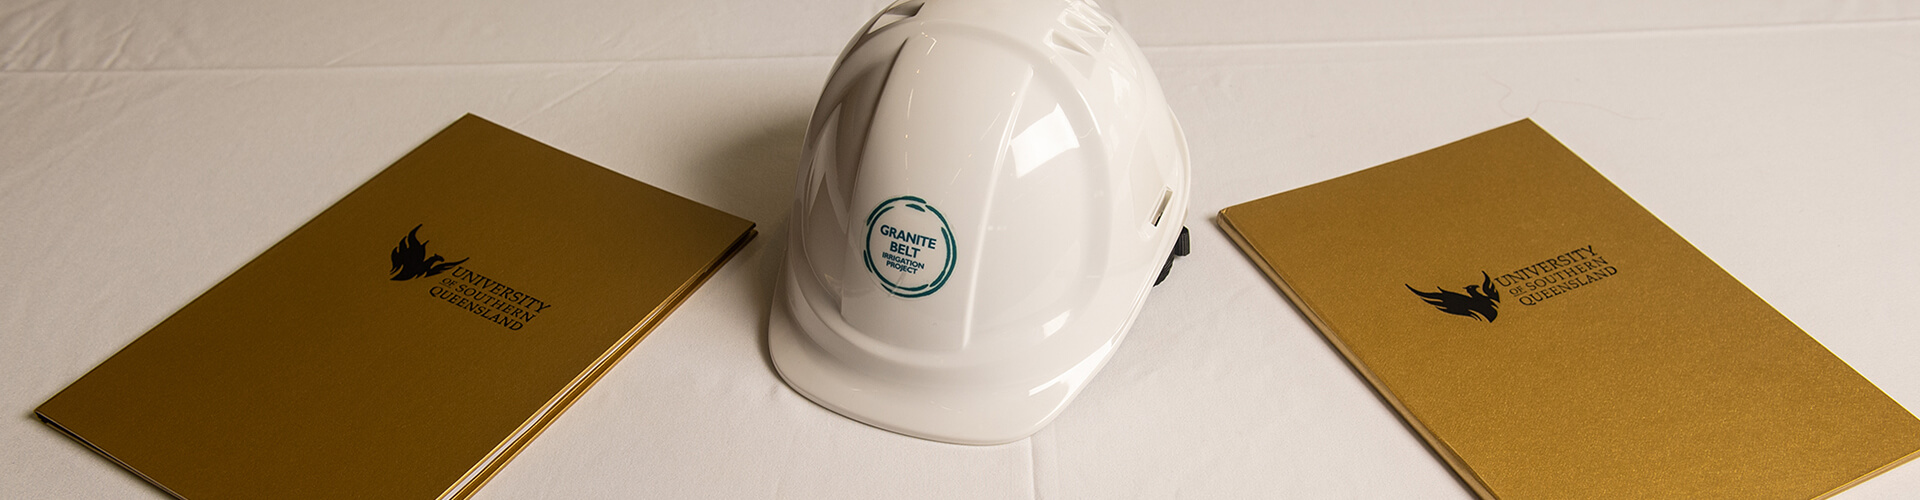 Hard hat and paper